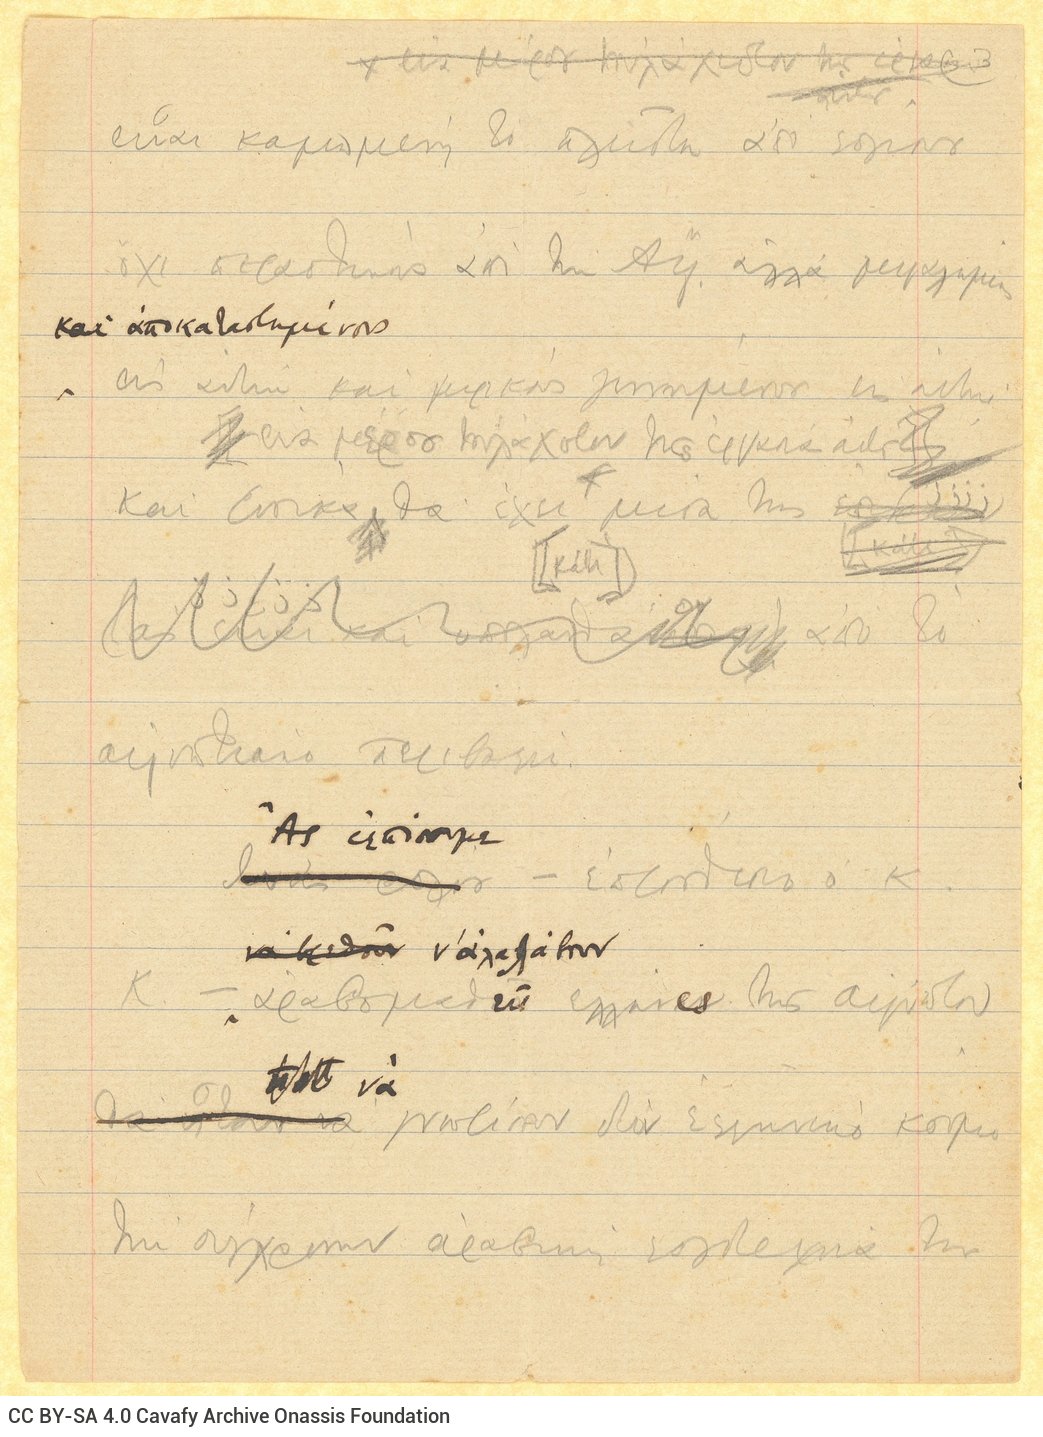 Handwritten notes on both sides of two ruled sheets and on the verso of part of a printed medium with a fragment of the po